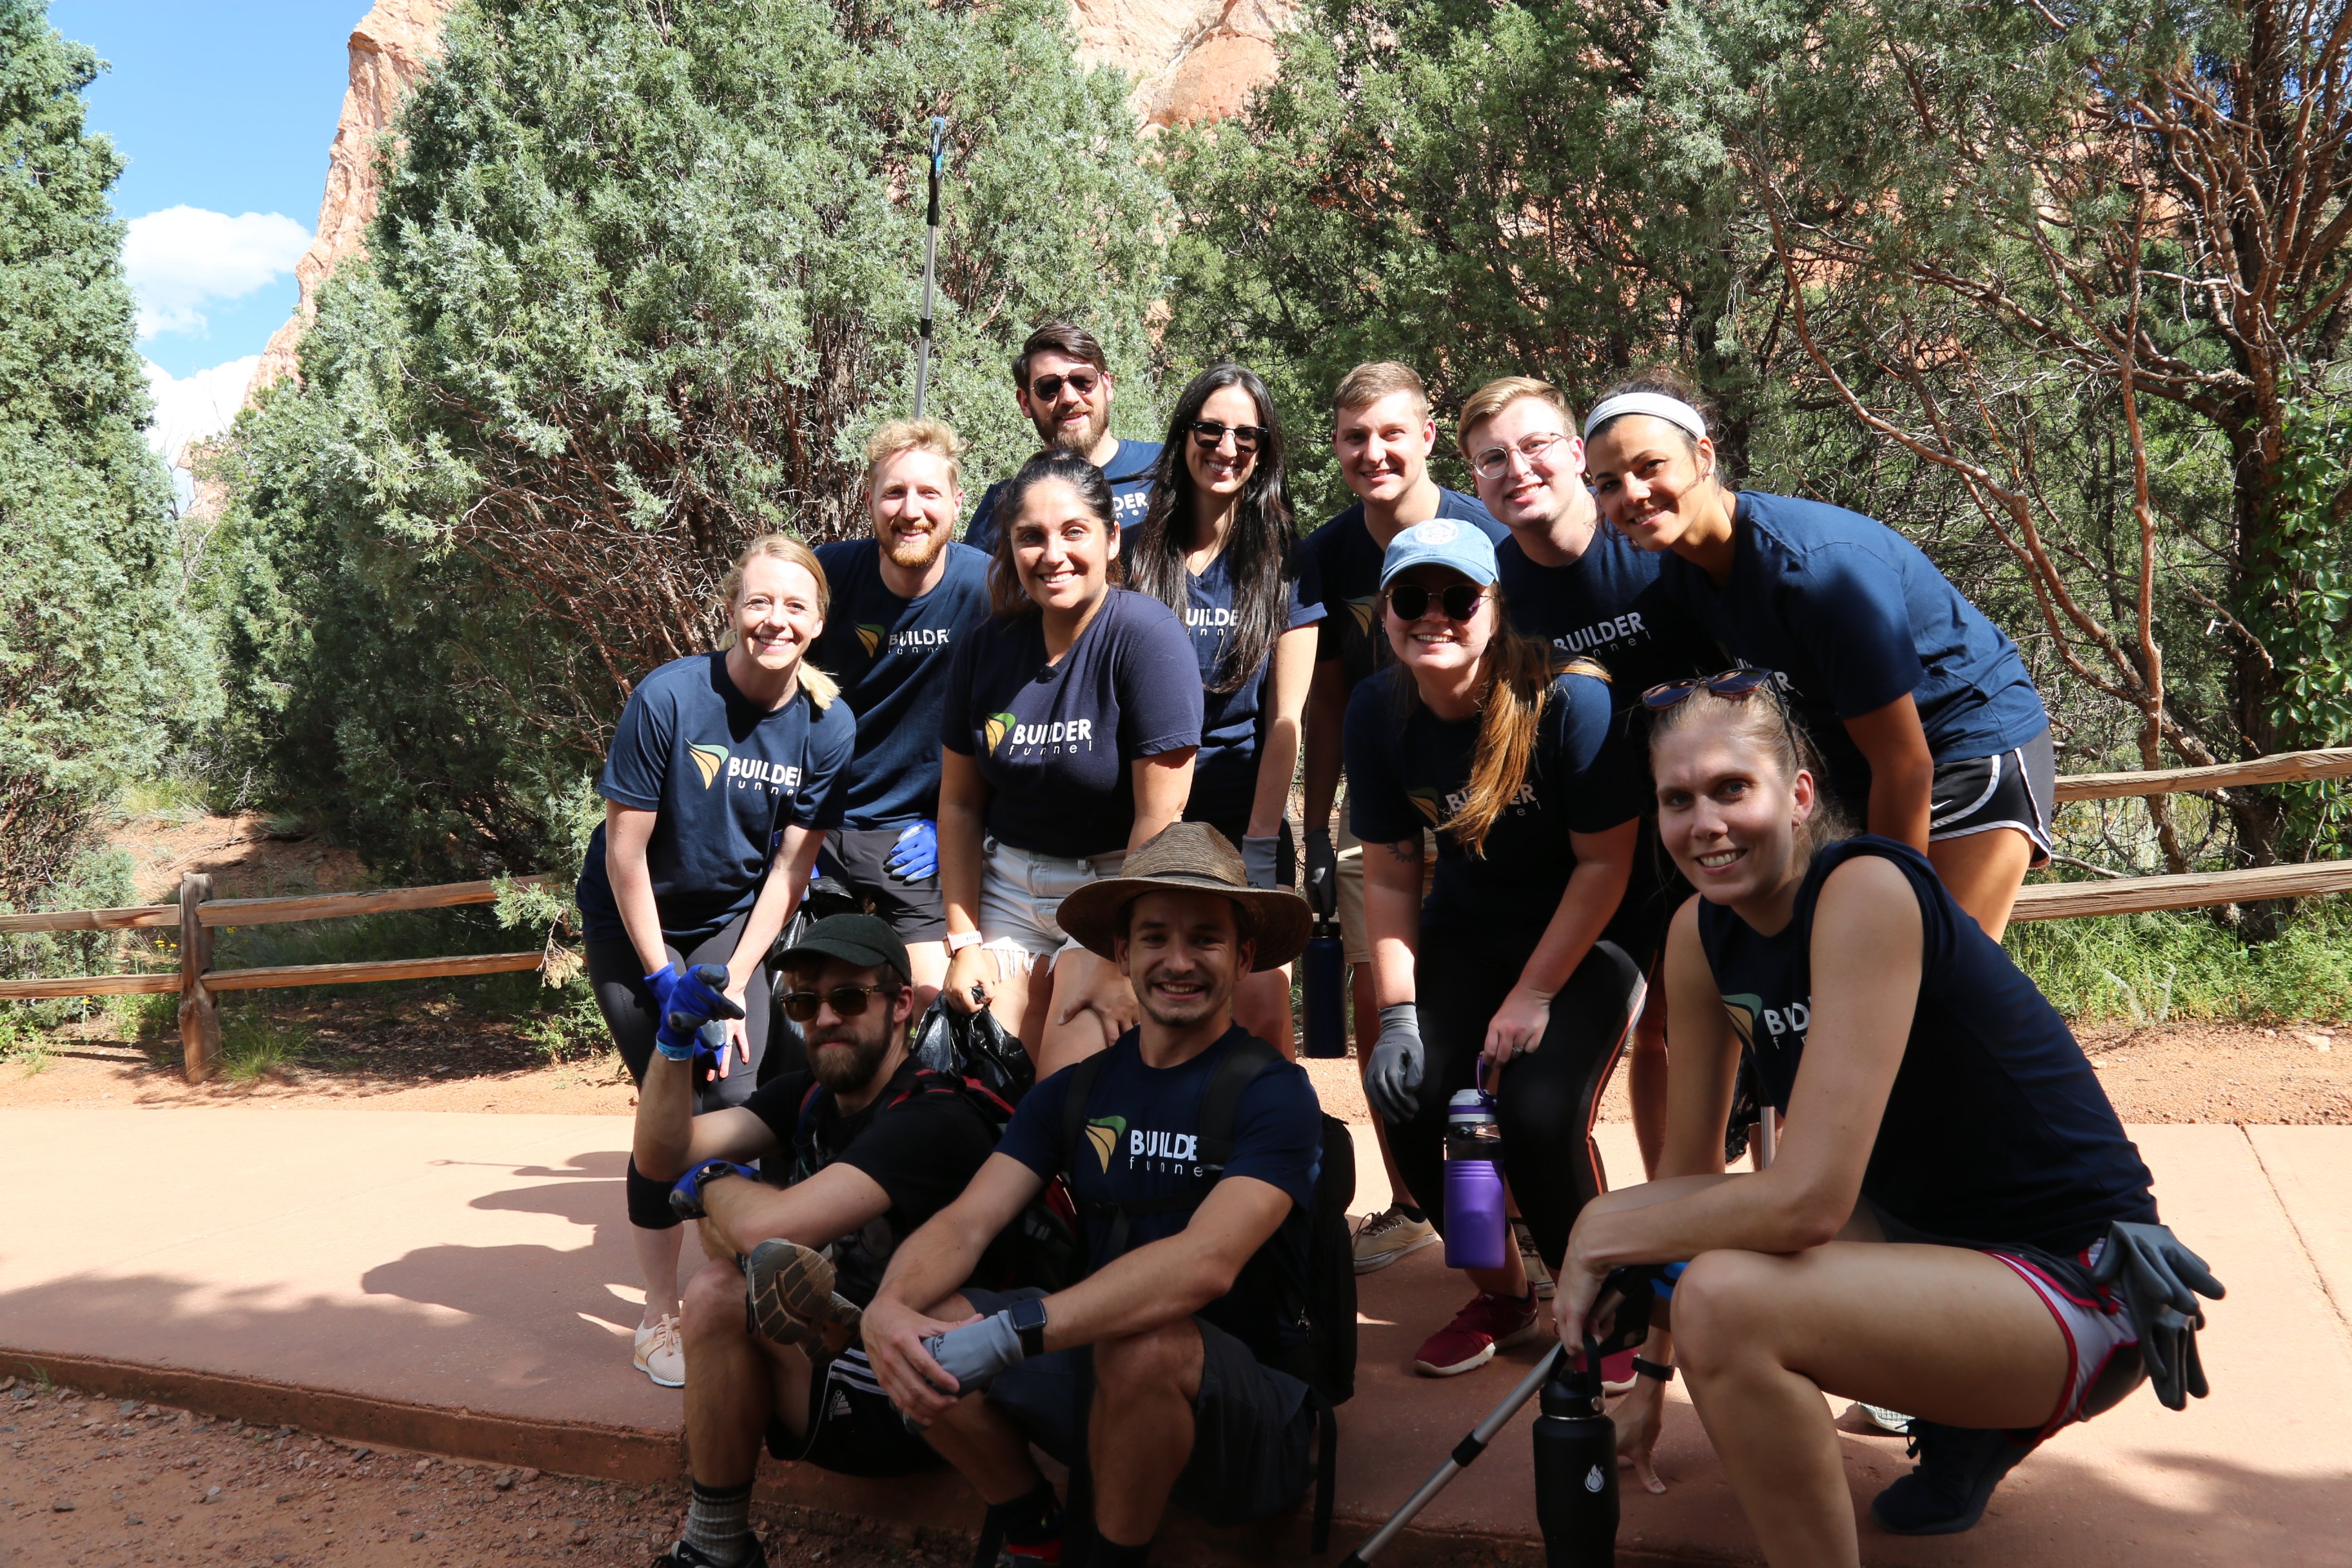 Builder Funnel Team picking up trash at their adopted trail in Garden of the Gods